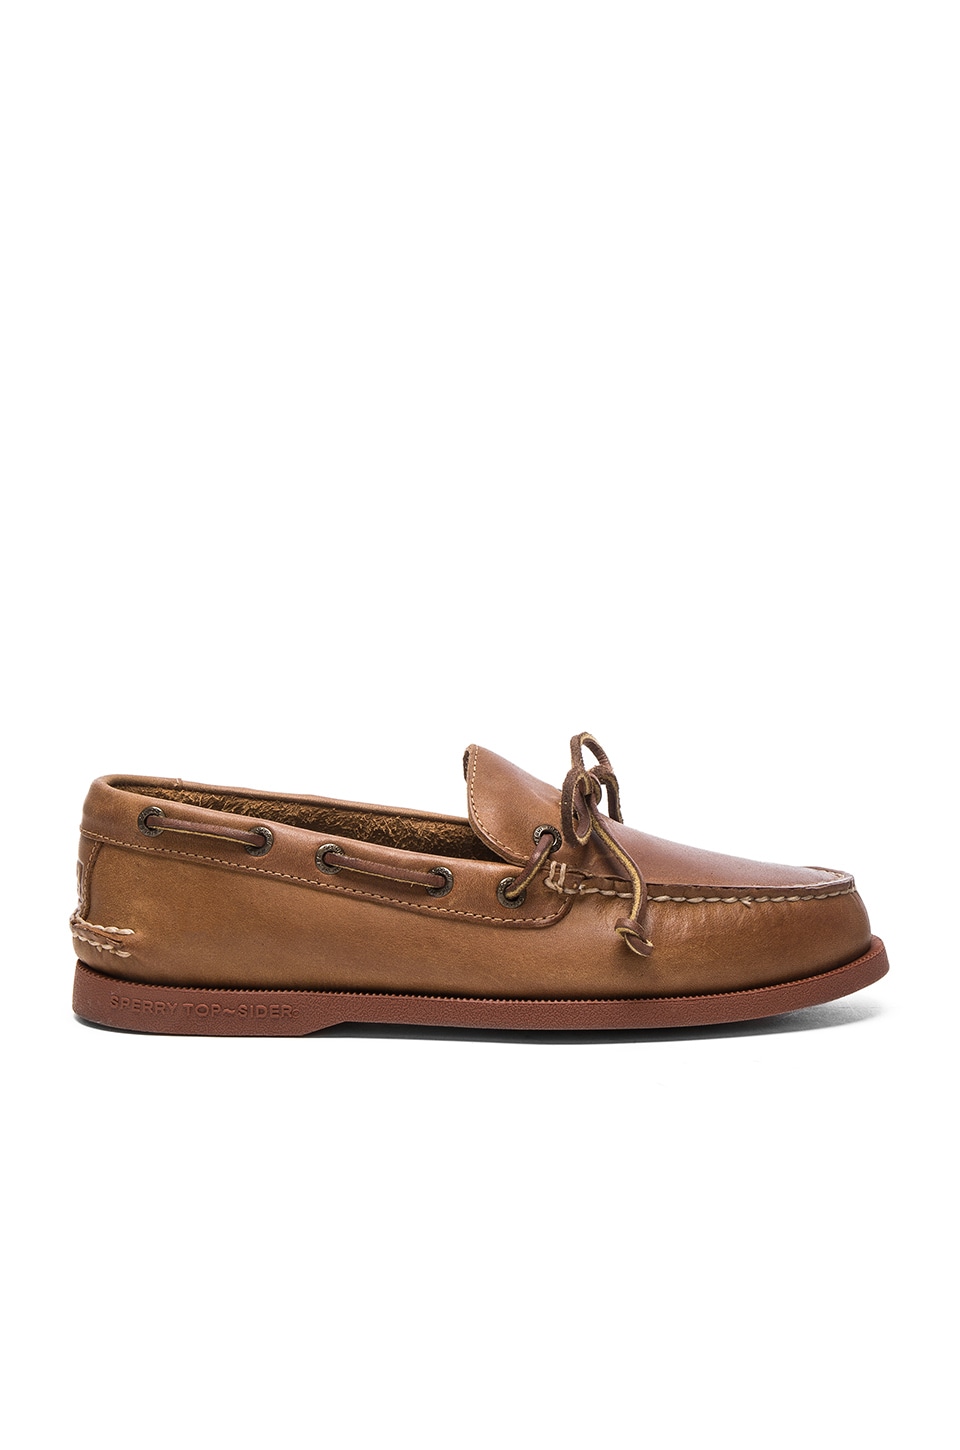 sperry top sider leather